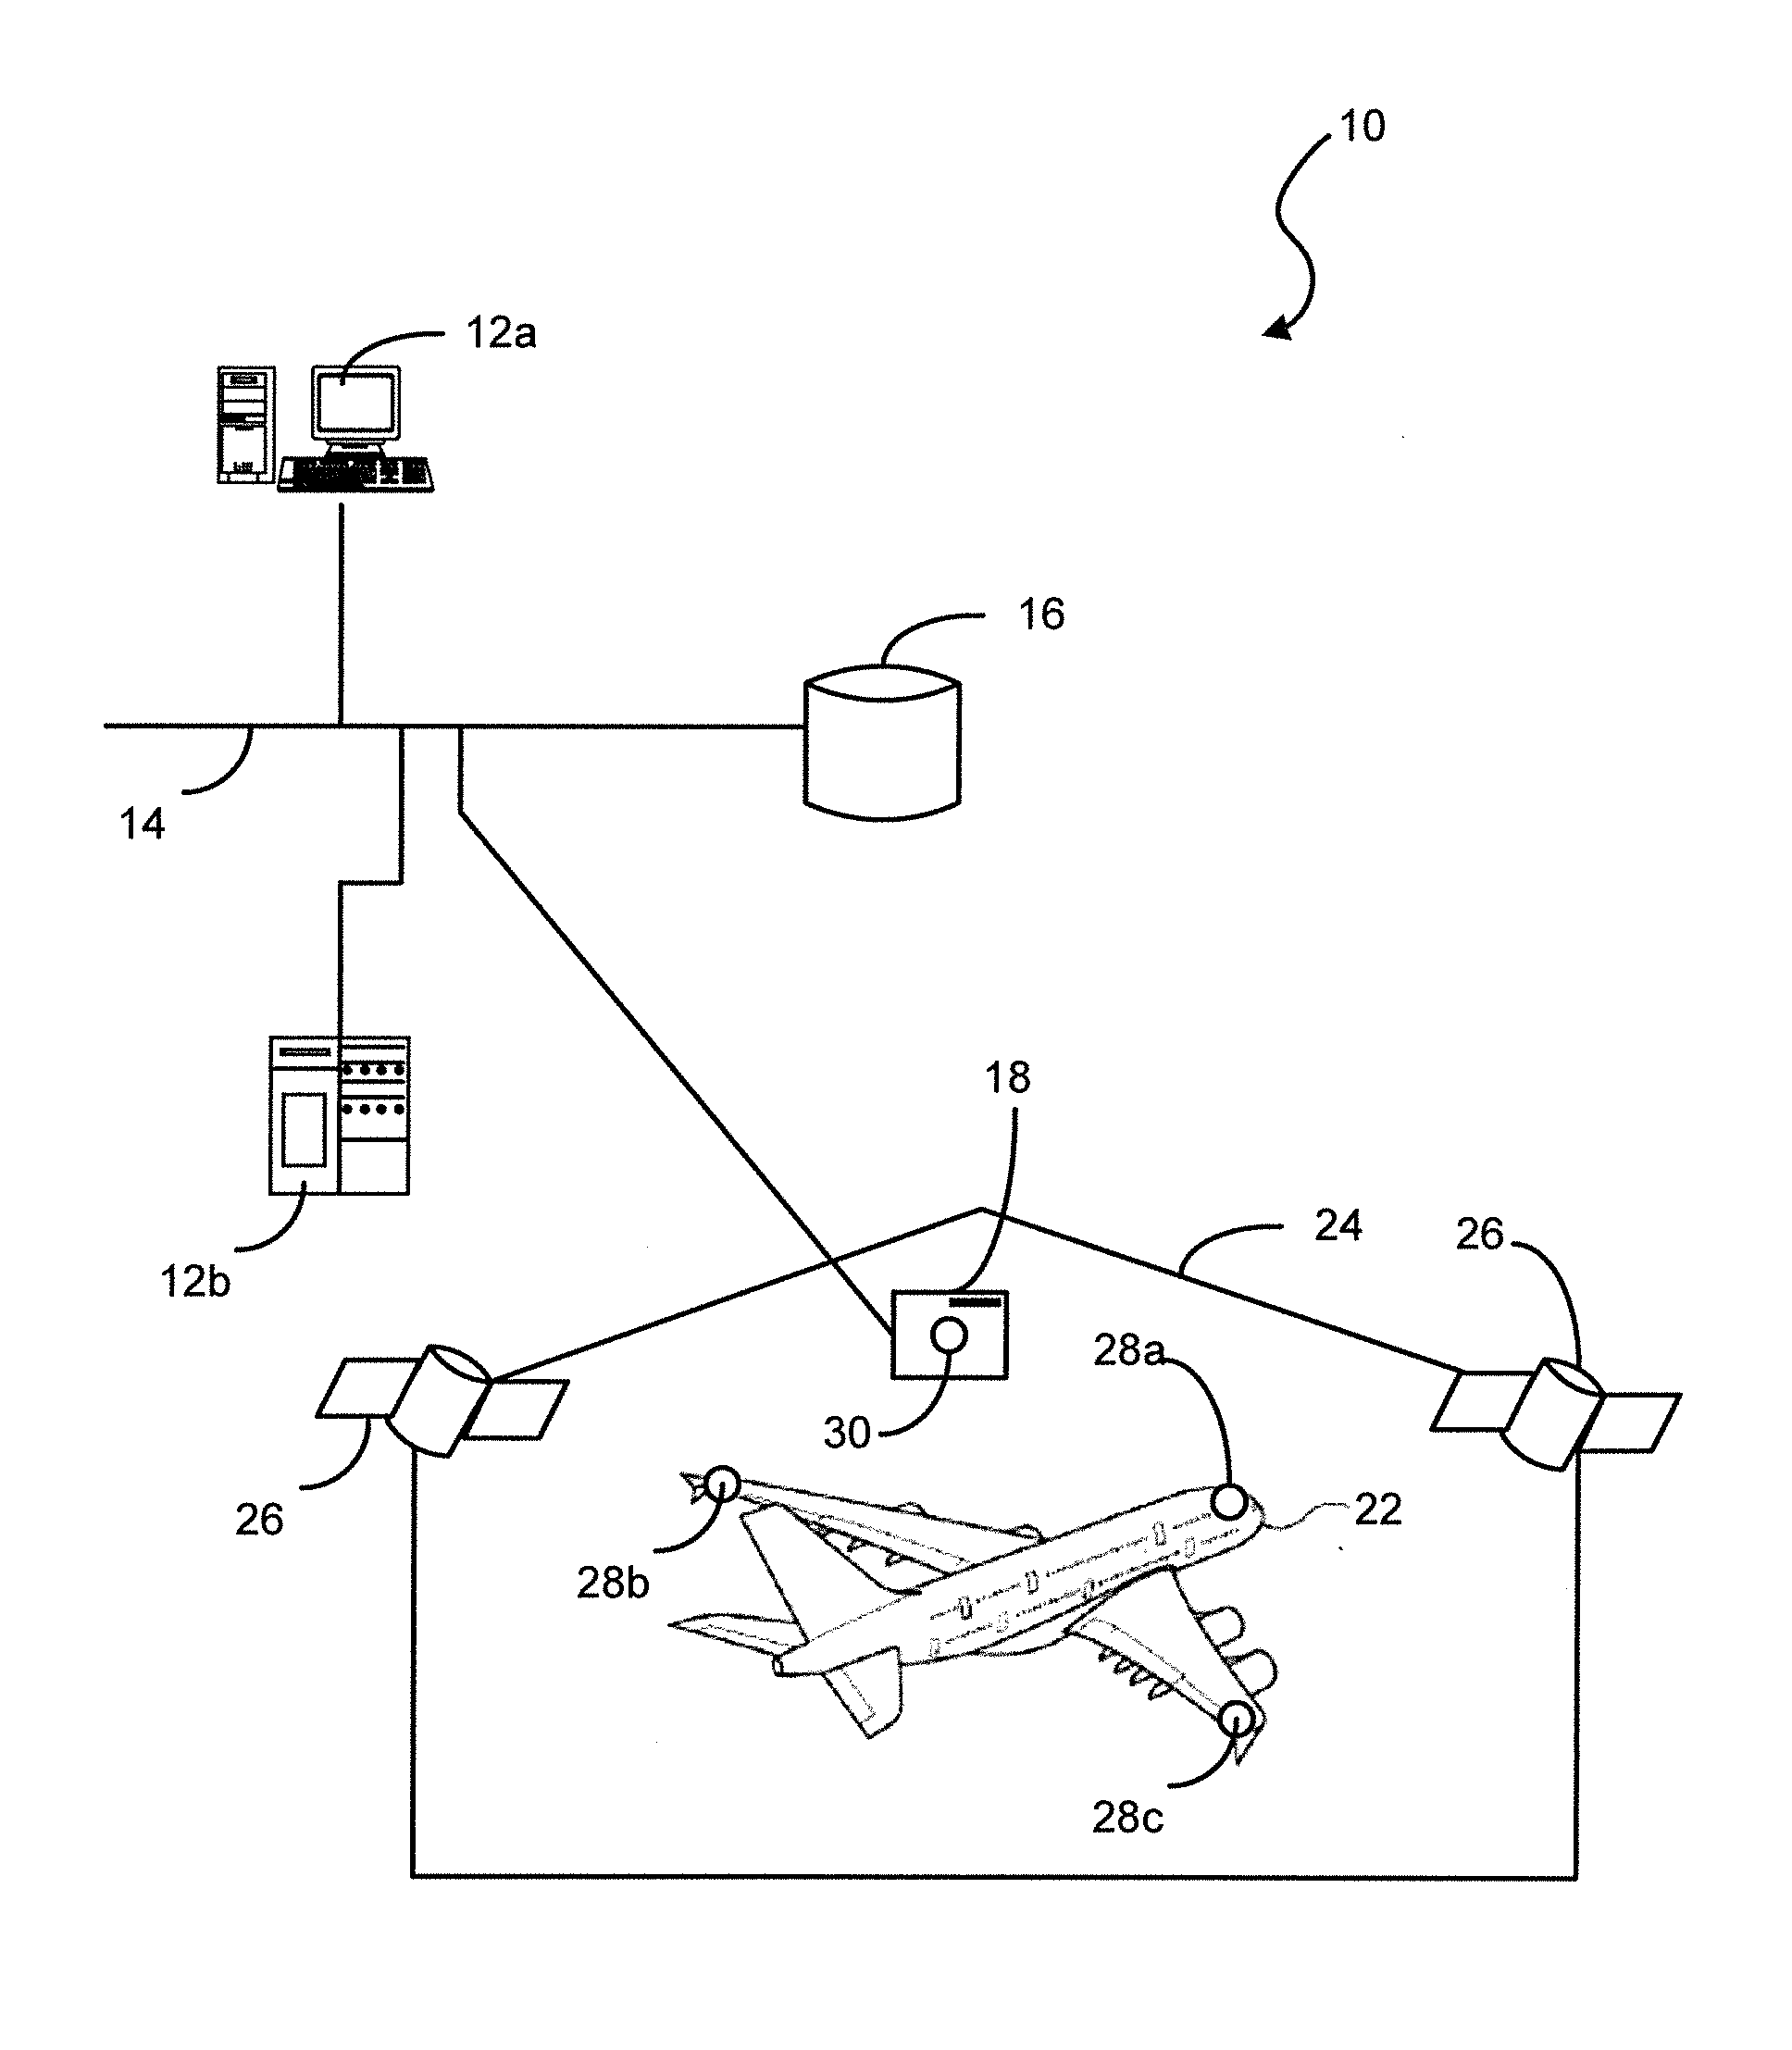 Damage detection and repair system and method using enhanced geolocation